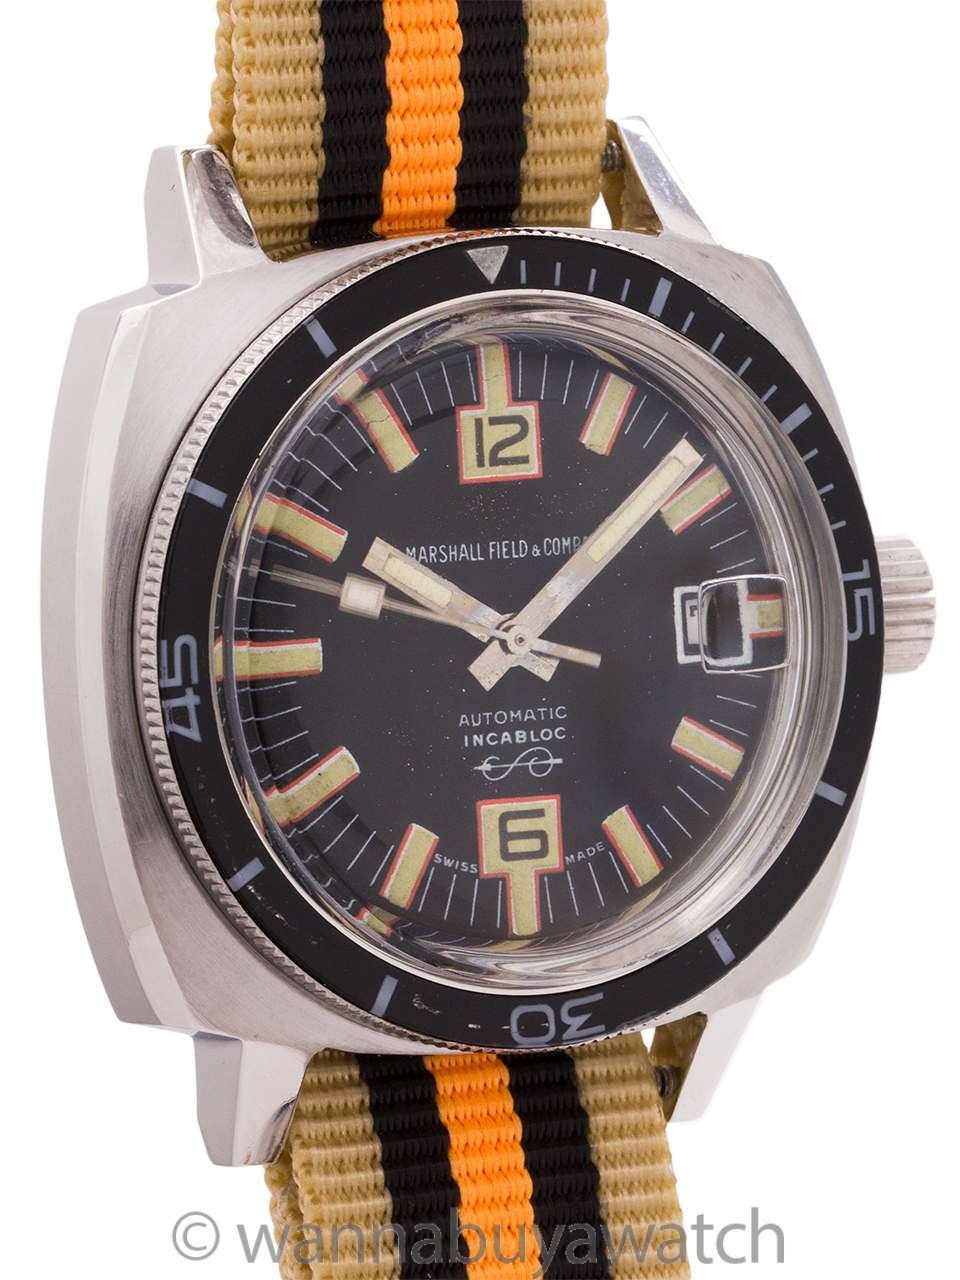 Marshal Fields Diver's Automatic circa 1960's